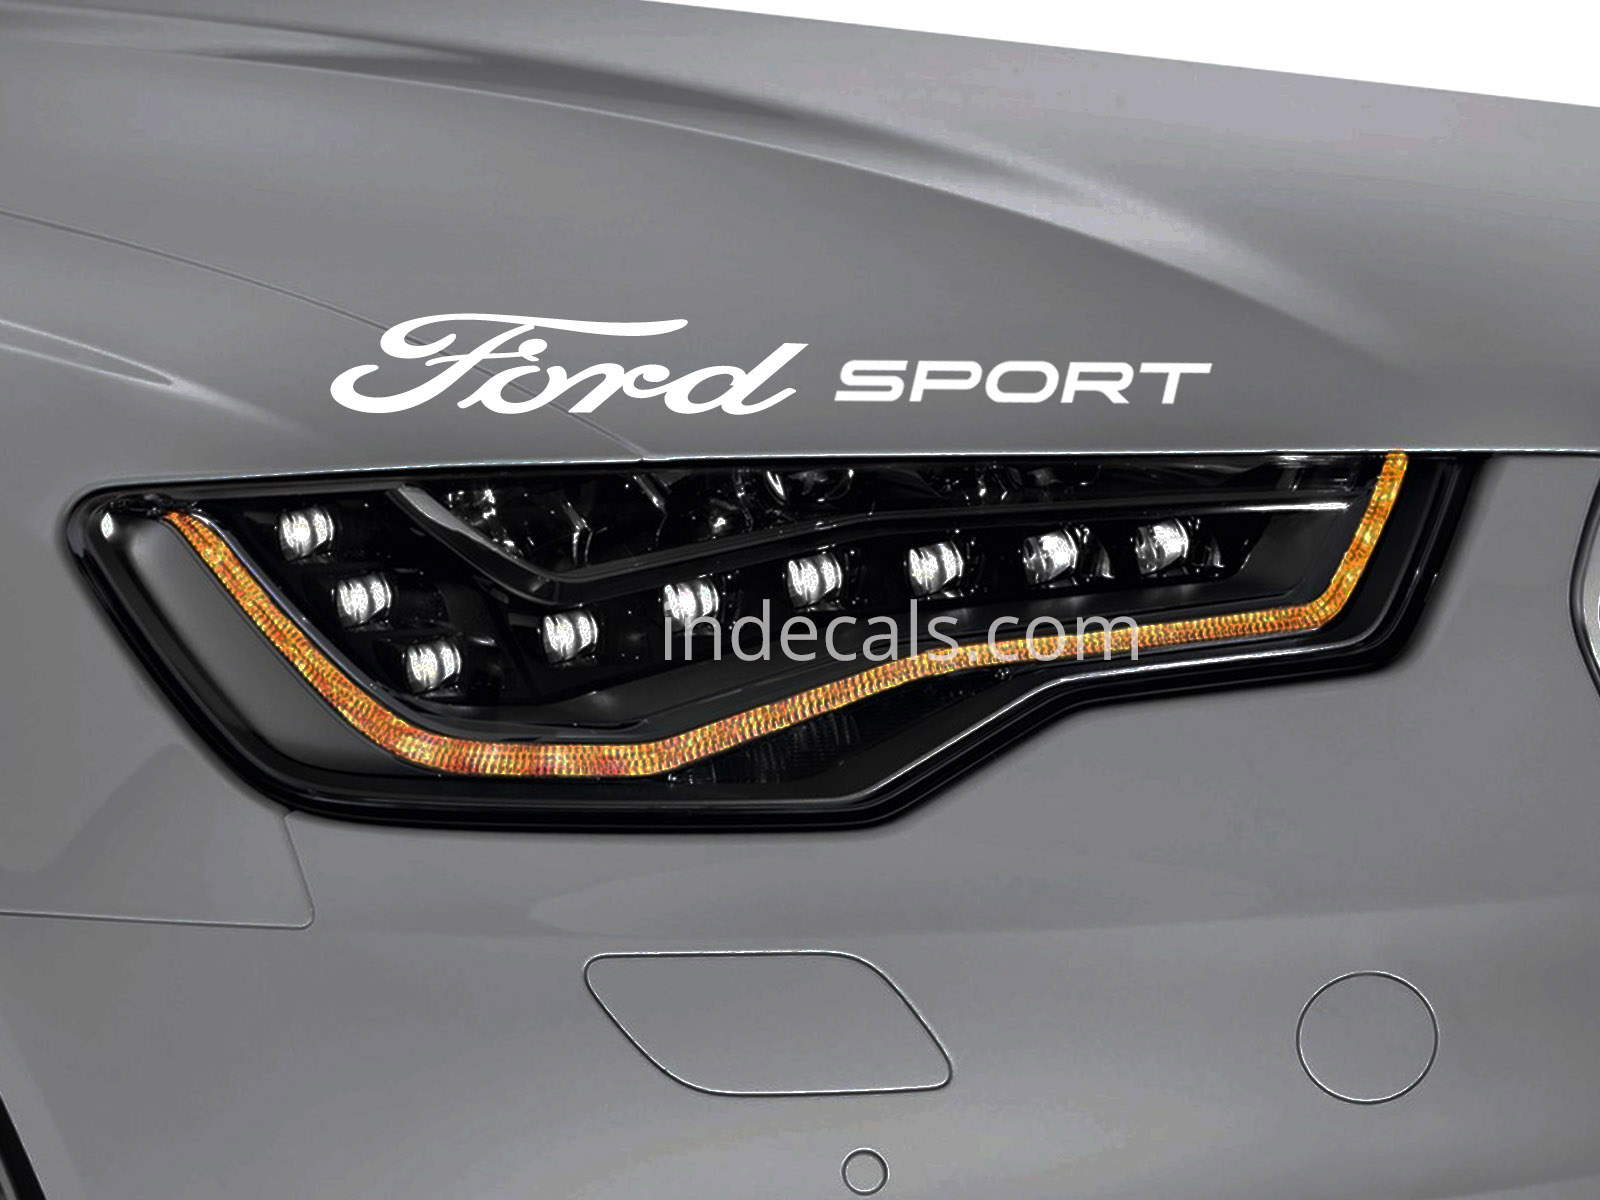 1 x Ford Sport Sticker for Eyebrow - White